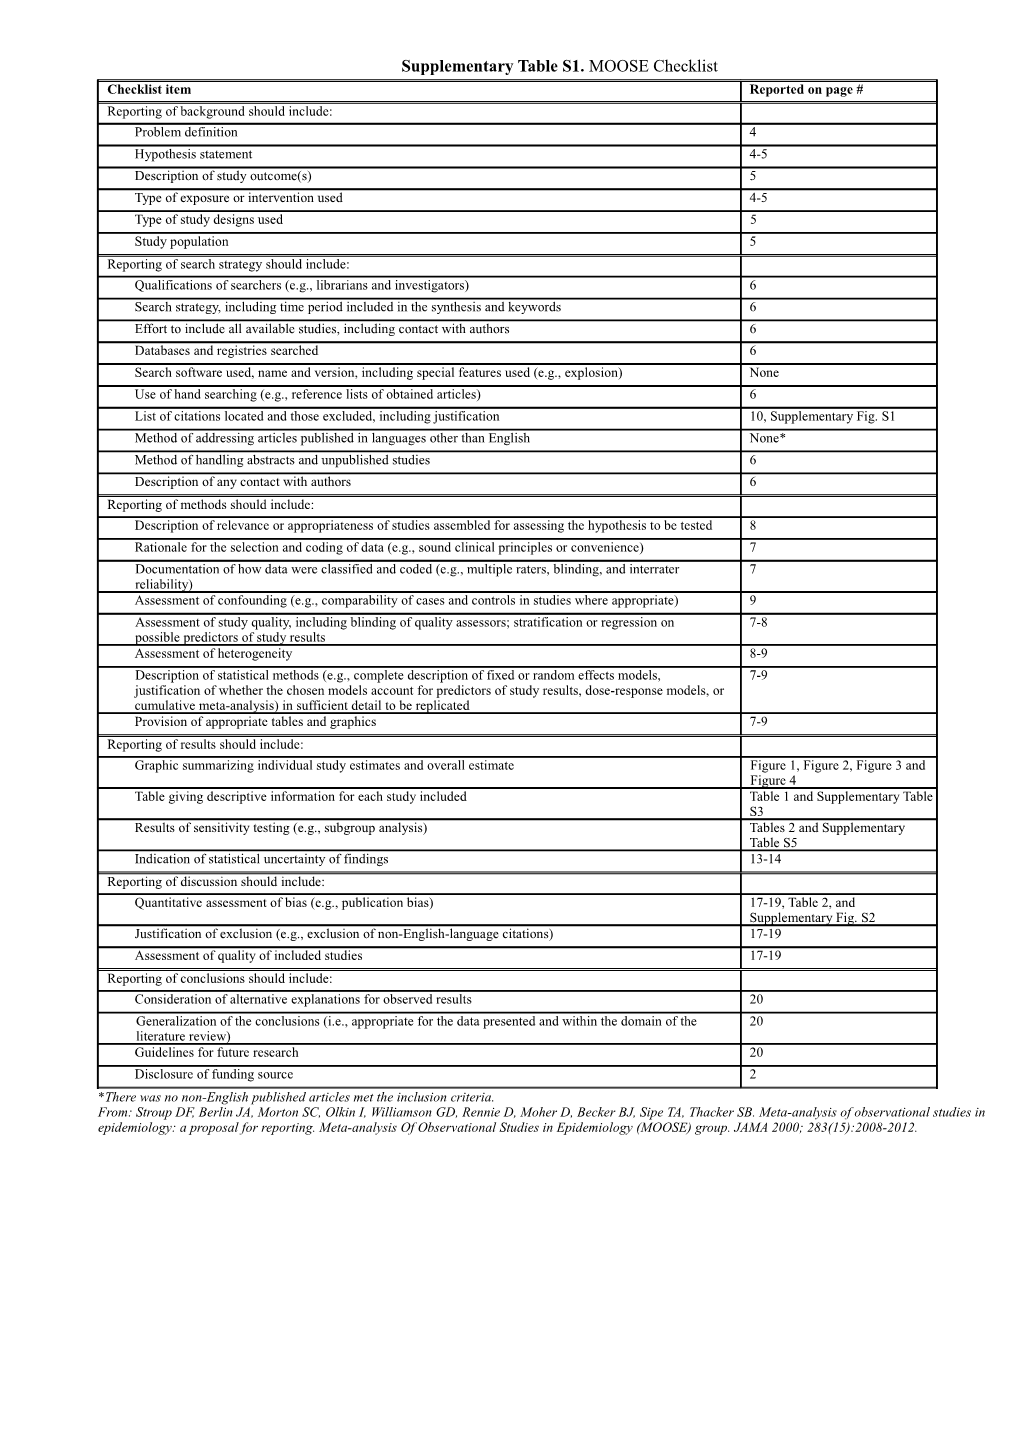 Supplementary Table S1. MOOSE Checklist